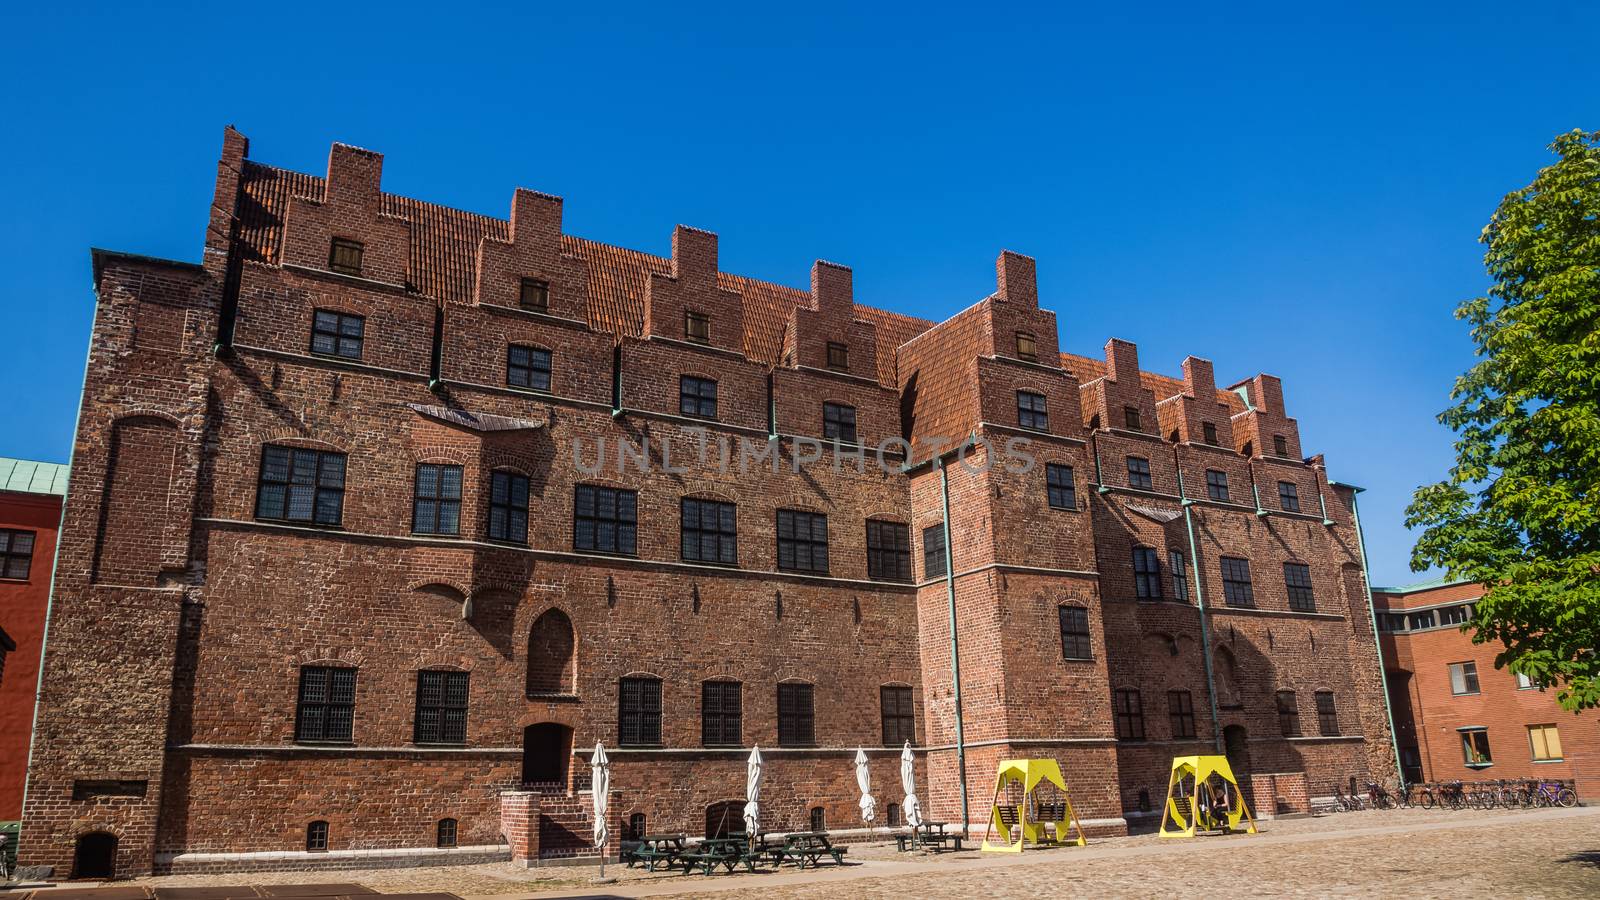 Malmo Castle ( Malmöhus), old fortress founded in 1434 by King Eric of Pomerania, demolished and rebuilt in early 16th century, main landmark of the city.